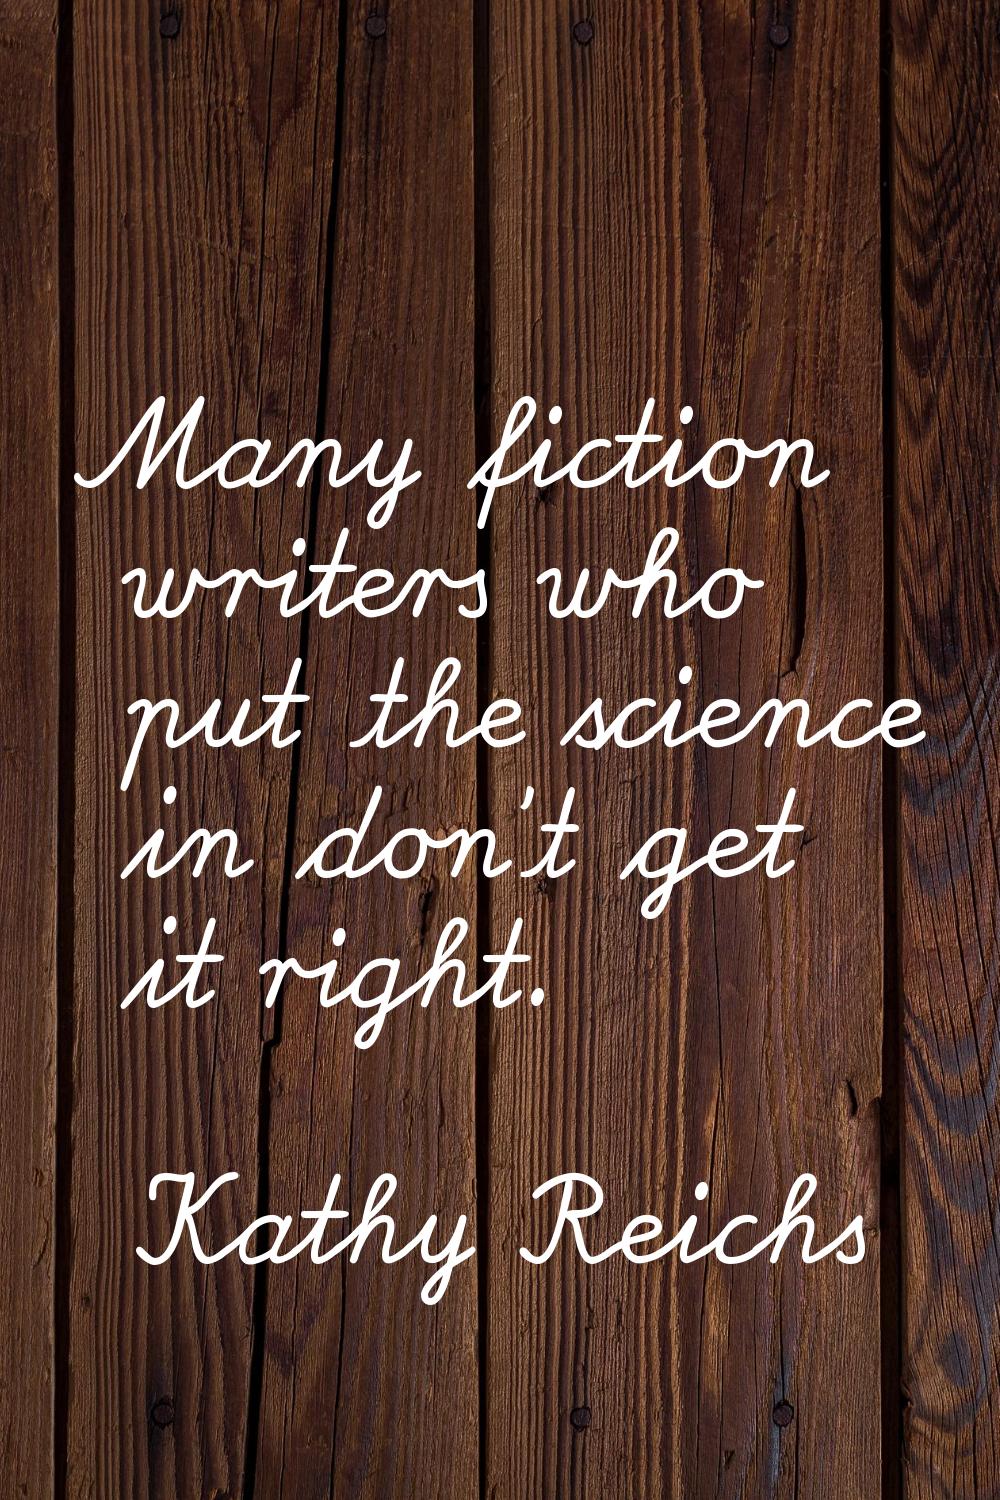 Many fiction writers who put the science in don't get it right.